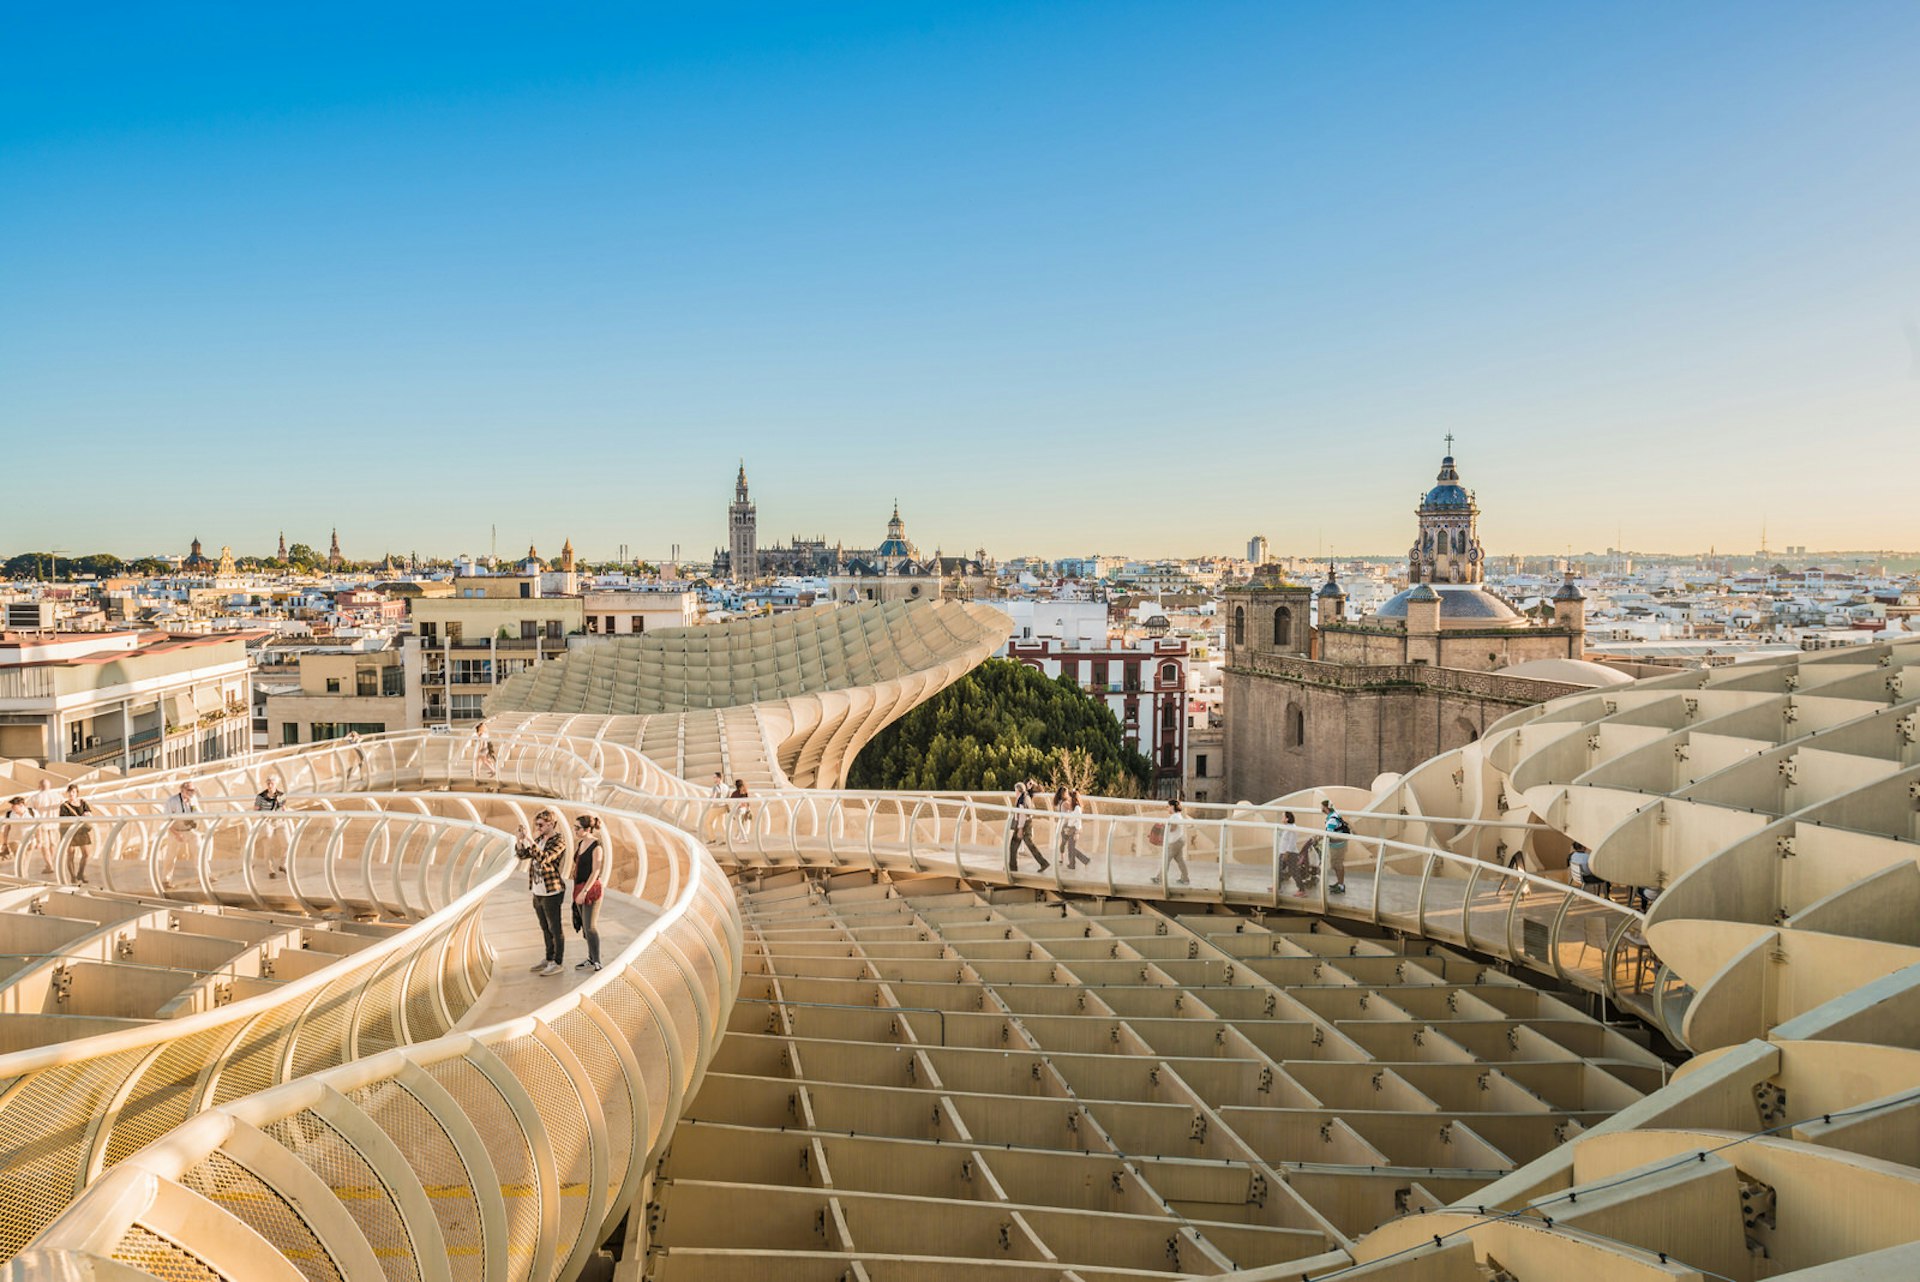 People walking on top of the Metropol Parasol, a huge structure made of wood and concrete in the shape of a pergola; there is a beautiful view across the Seville skyline, taking in the cathedral and Giralda bell tower.